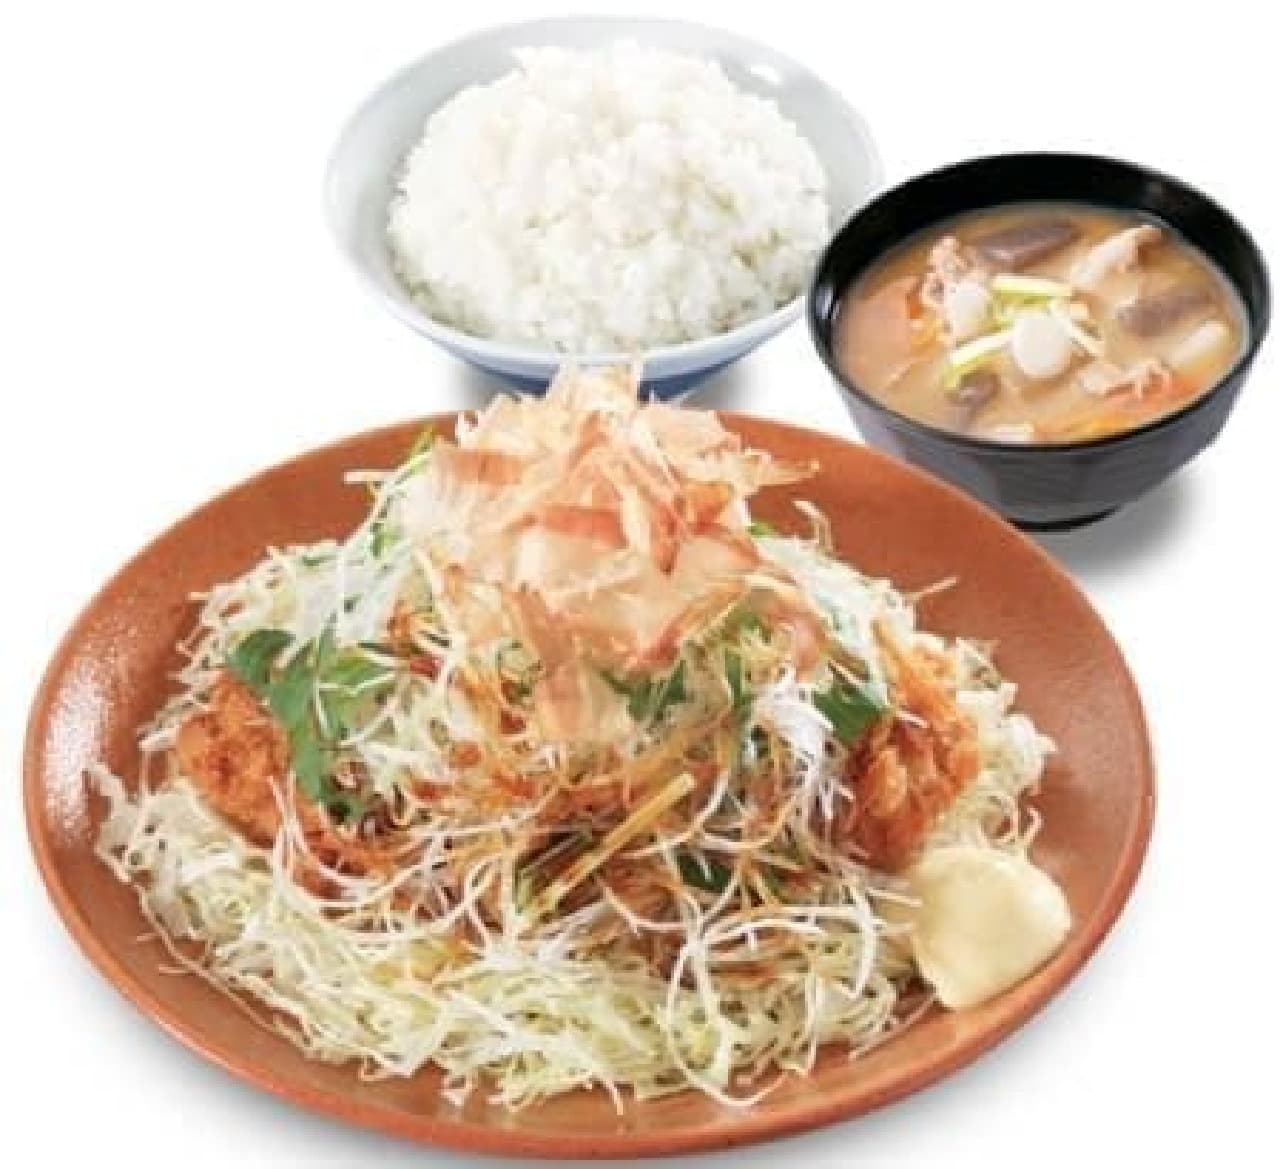 If you want to eat rice and chicken katsu separately, try a set meal